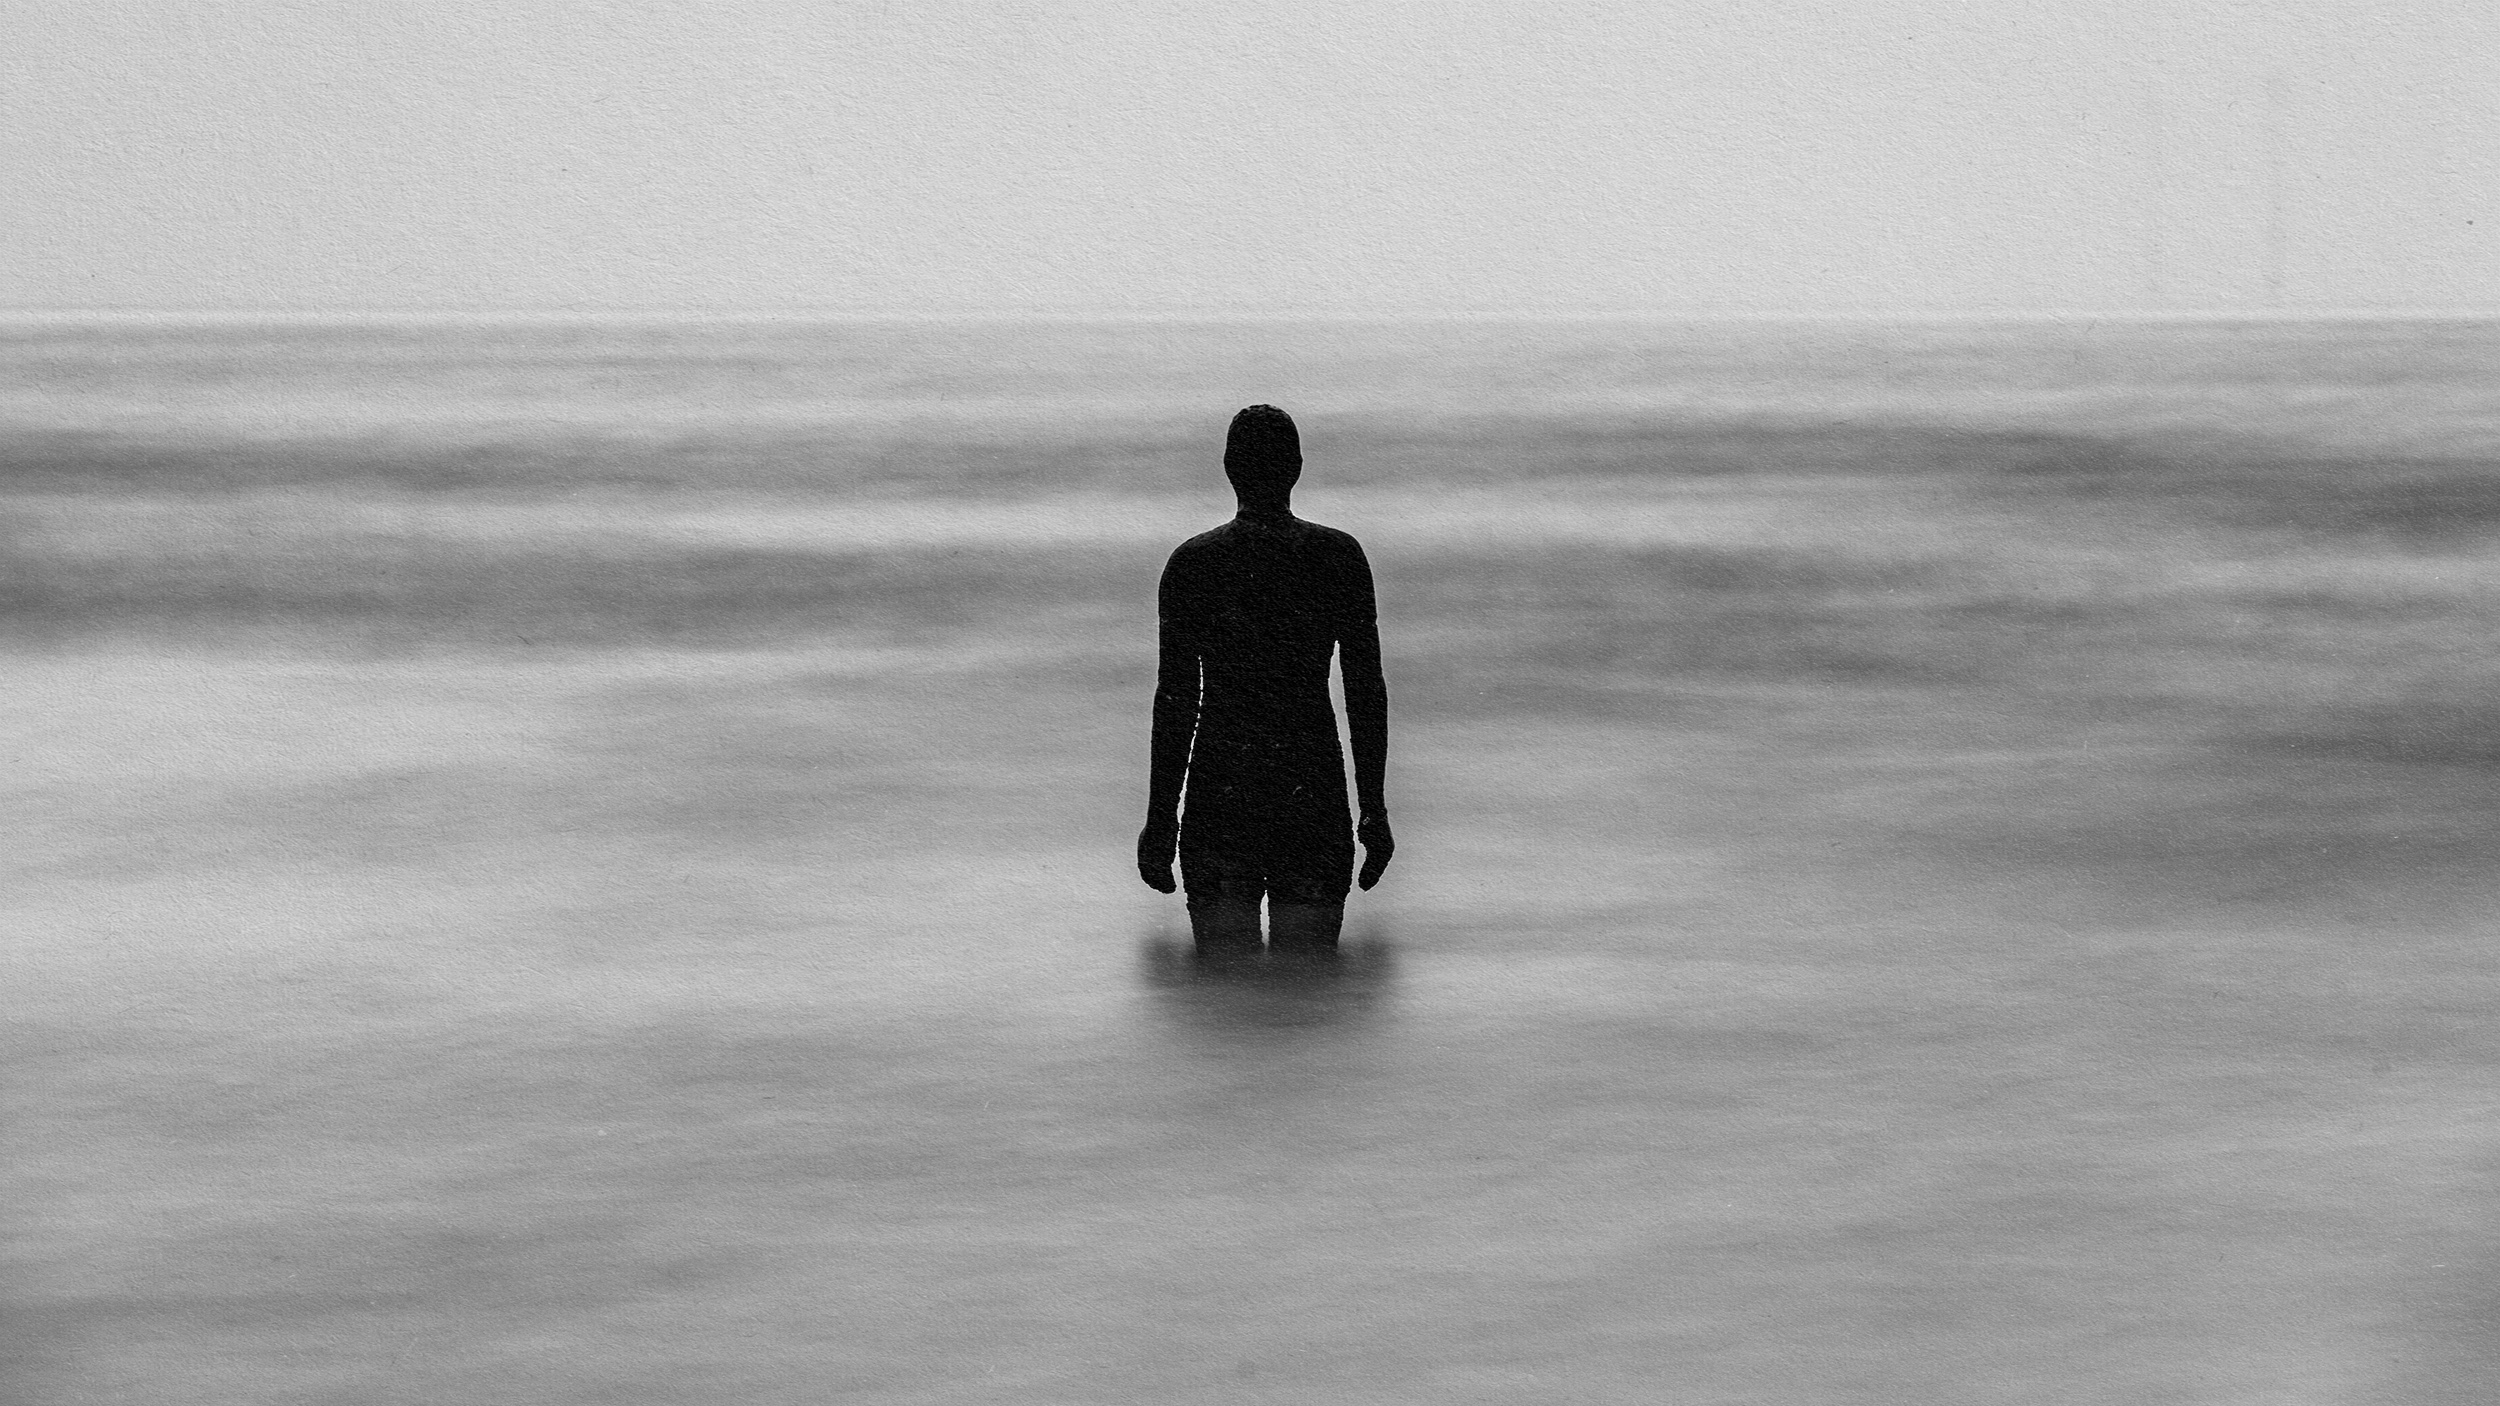 A person standing in the ocean captured in a haunting black and white photo.